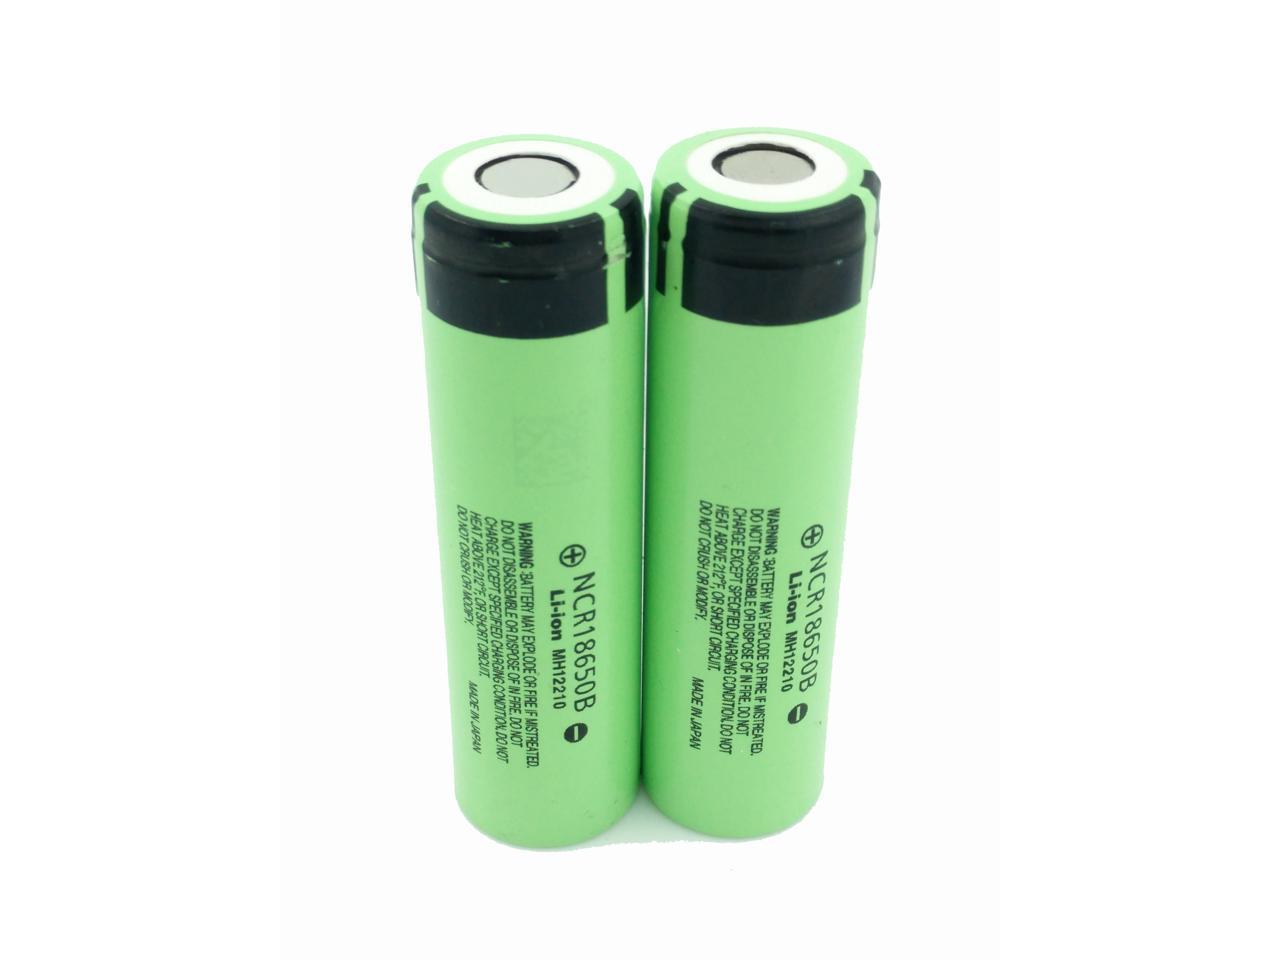 not Button Top 4 Pcs Flat Top Batteries 18650 3.7V 3400mAH High-Capacity Lithium Rechargeable Battery for LED Lights/Toys/MP3/TV Remote Controls/Alarm Clocks/Flashlight Torch/not aa Battery 